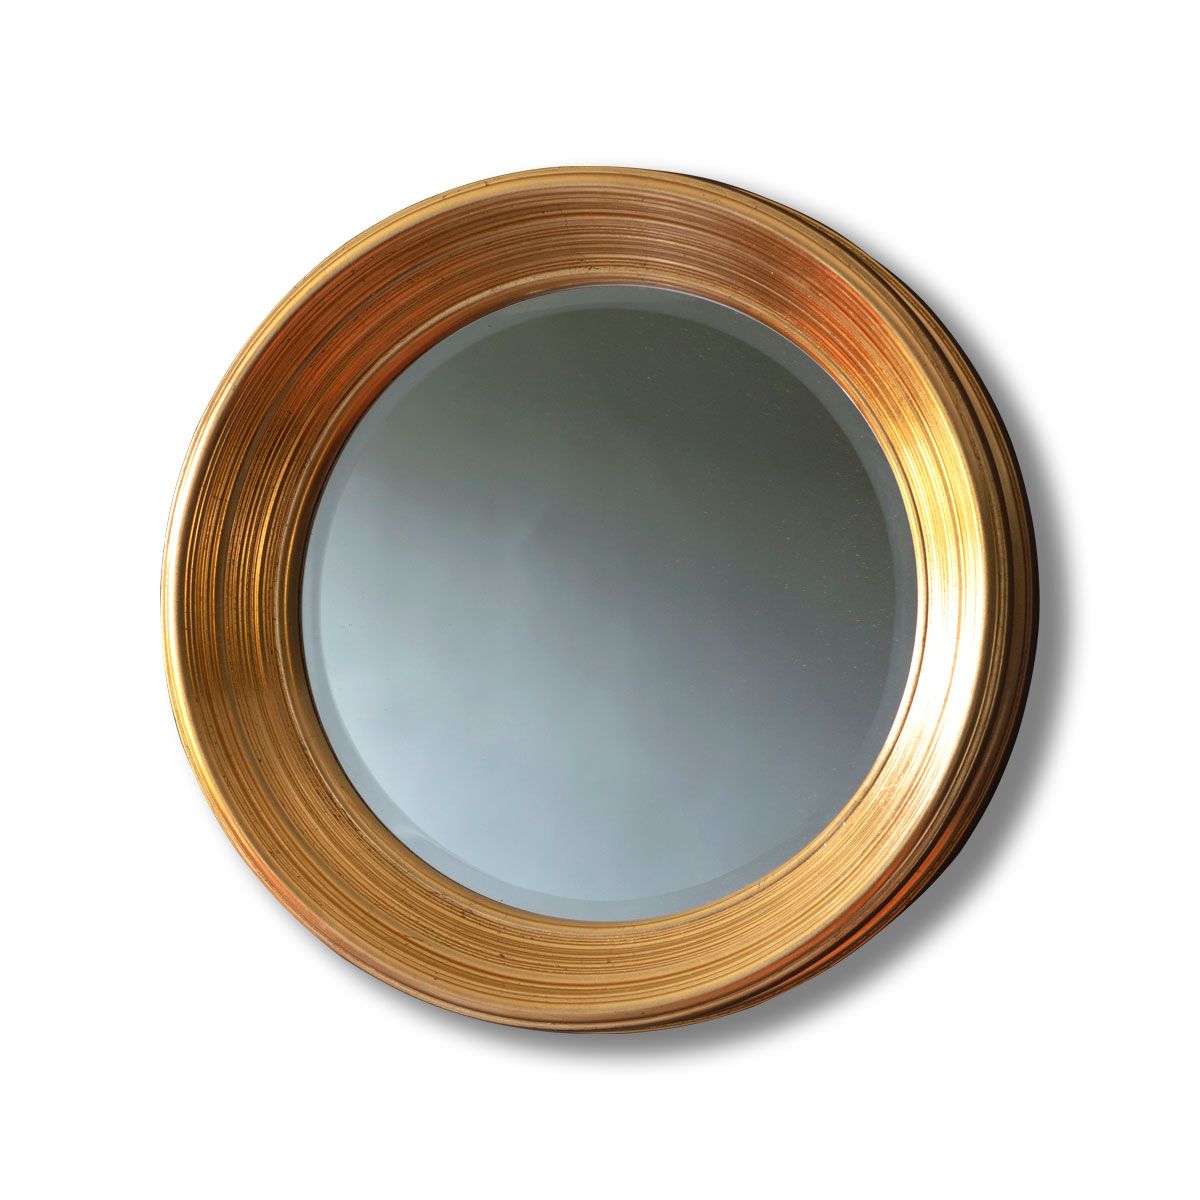 Chenille Gold Round Wall Mirror 65cm X 65cm | Luxe Mirrors With Regard To Round 4 Section Wall Mirrors (View 14 of 15)